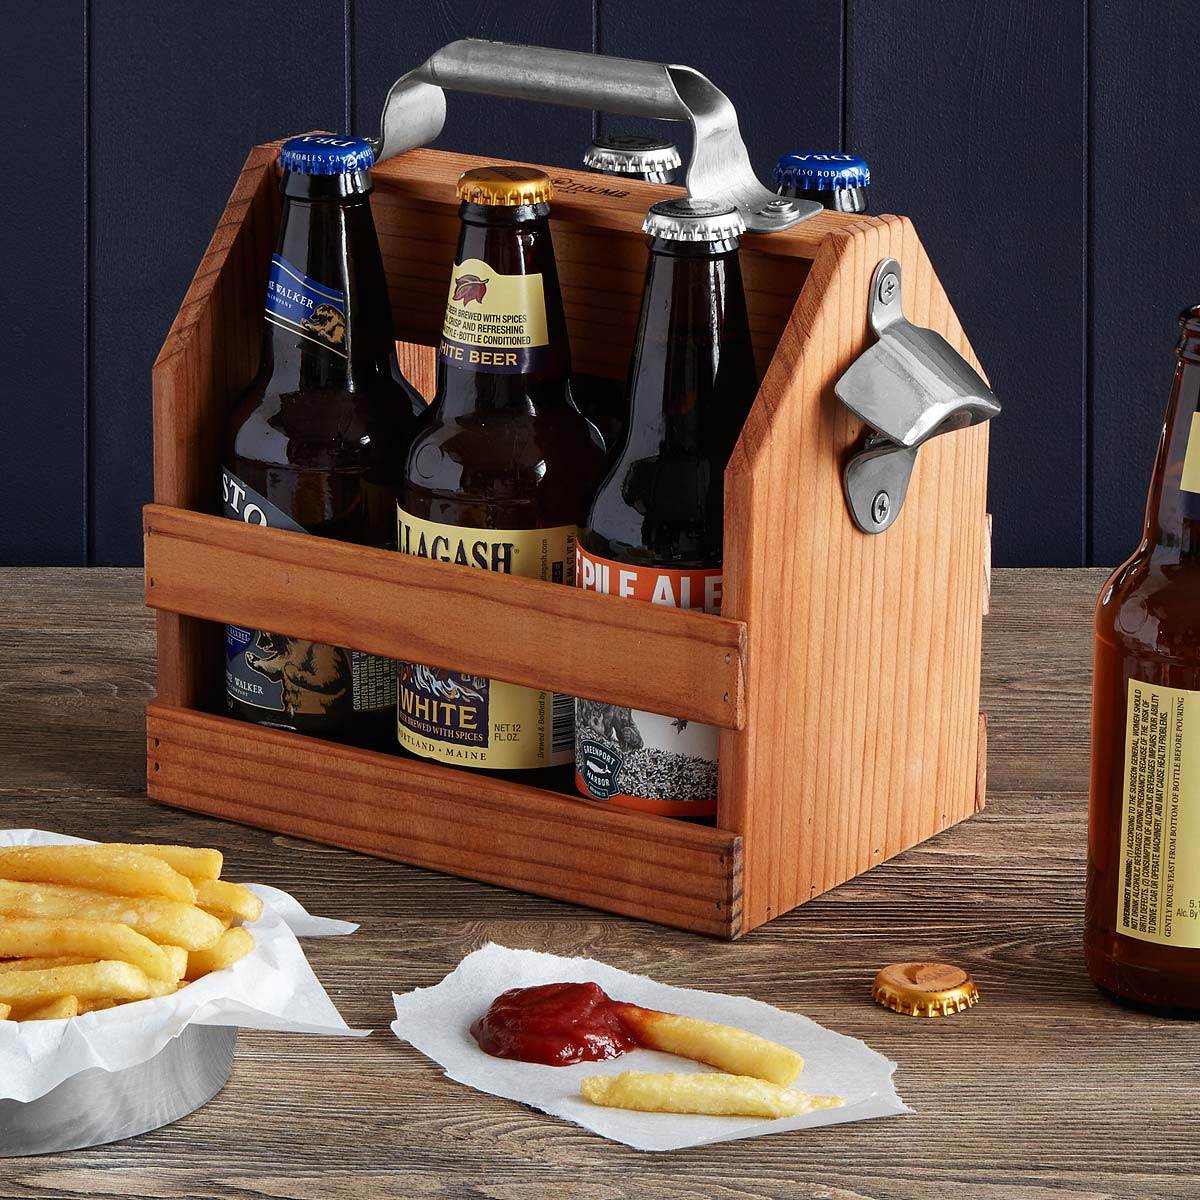 Uncommon Goods Beer Caddy - Gifts for the Groom as featured on The National Vintage Wedding Fair blog